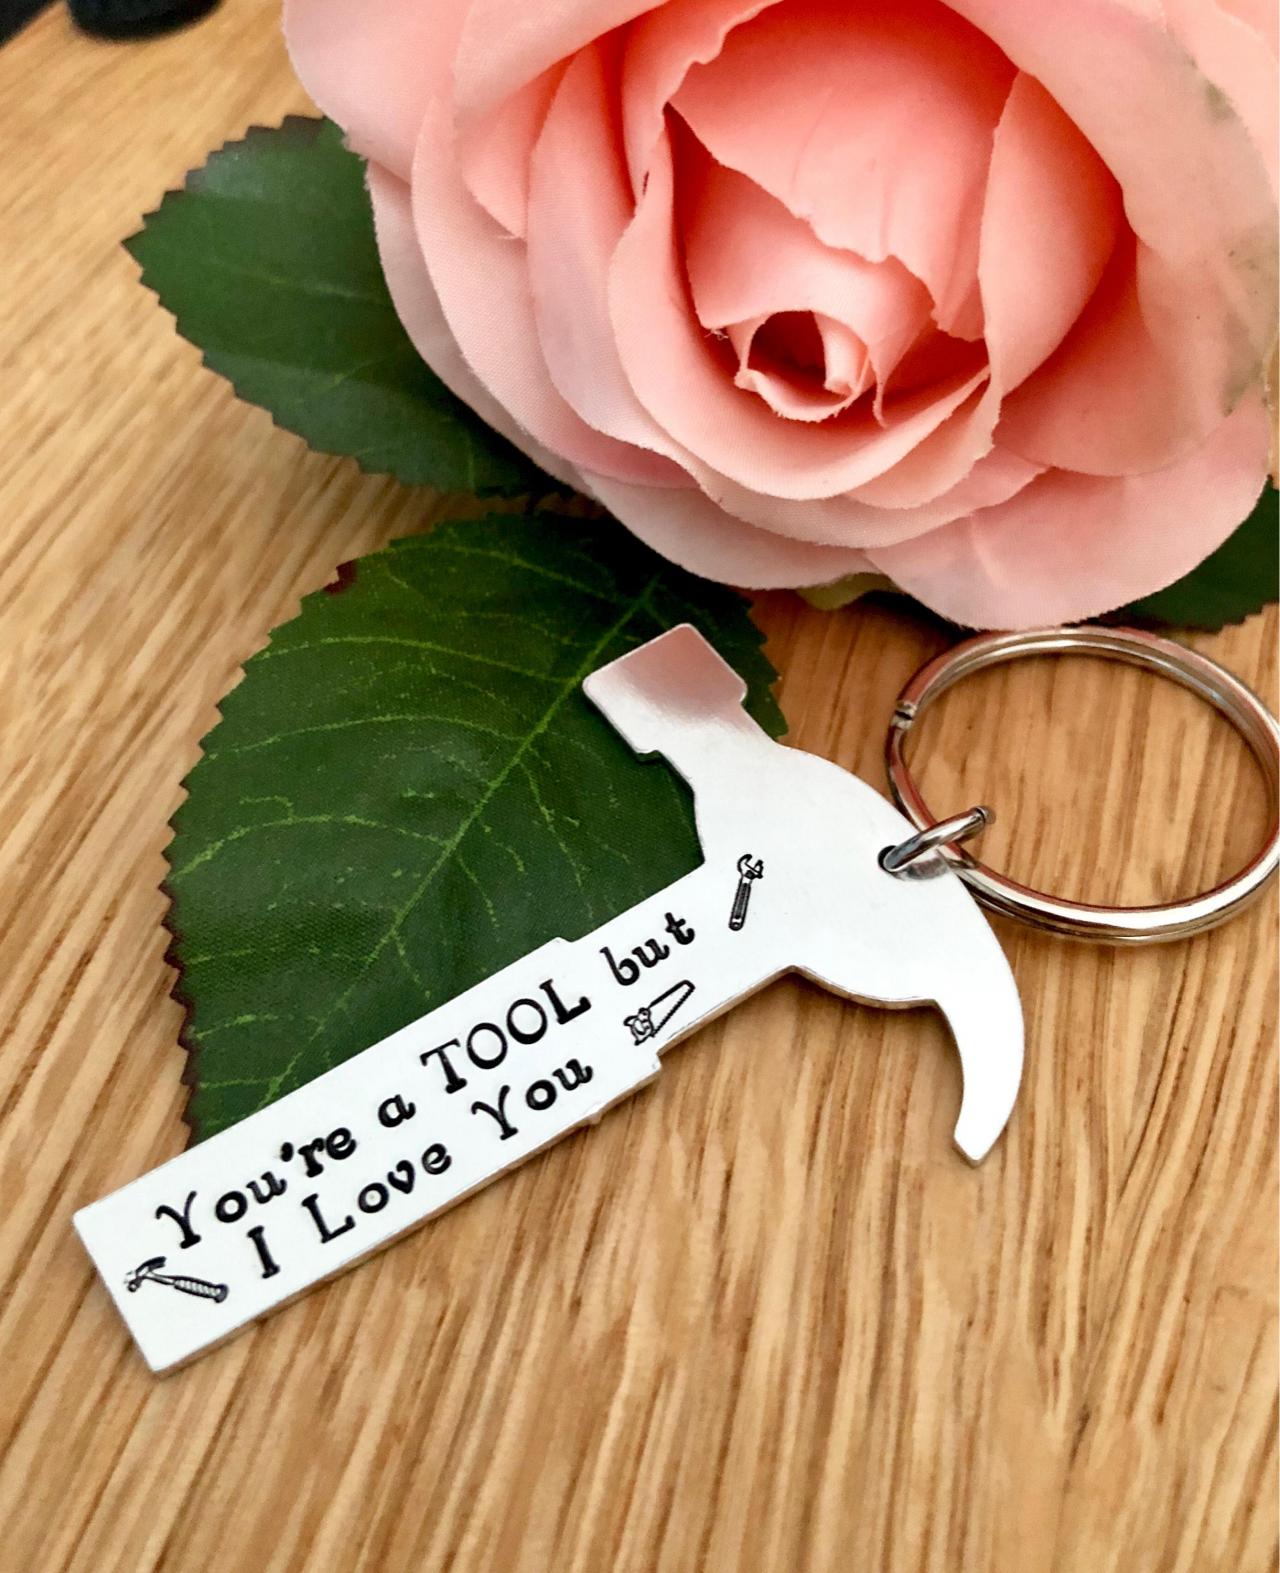 You're A Tool But I Love You, Joke Gift, Funny Gift, Valentines Gift, Gift For Him, Valentine's Day Gift, Stocking Filler, Diy